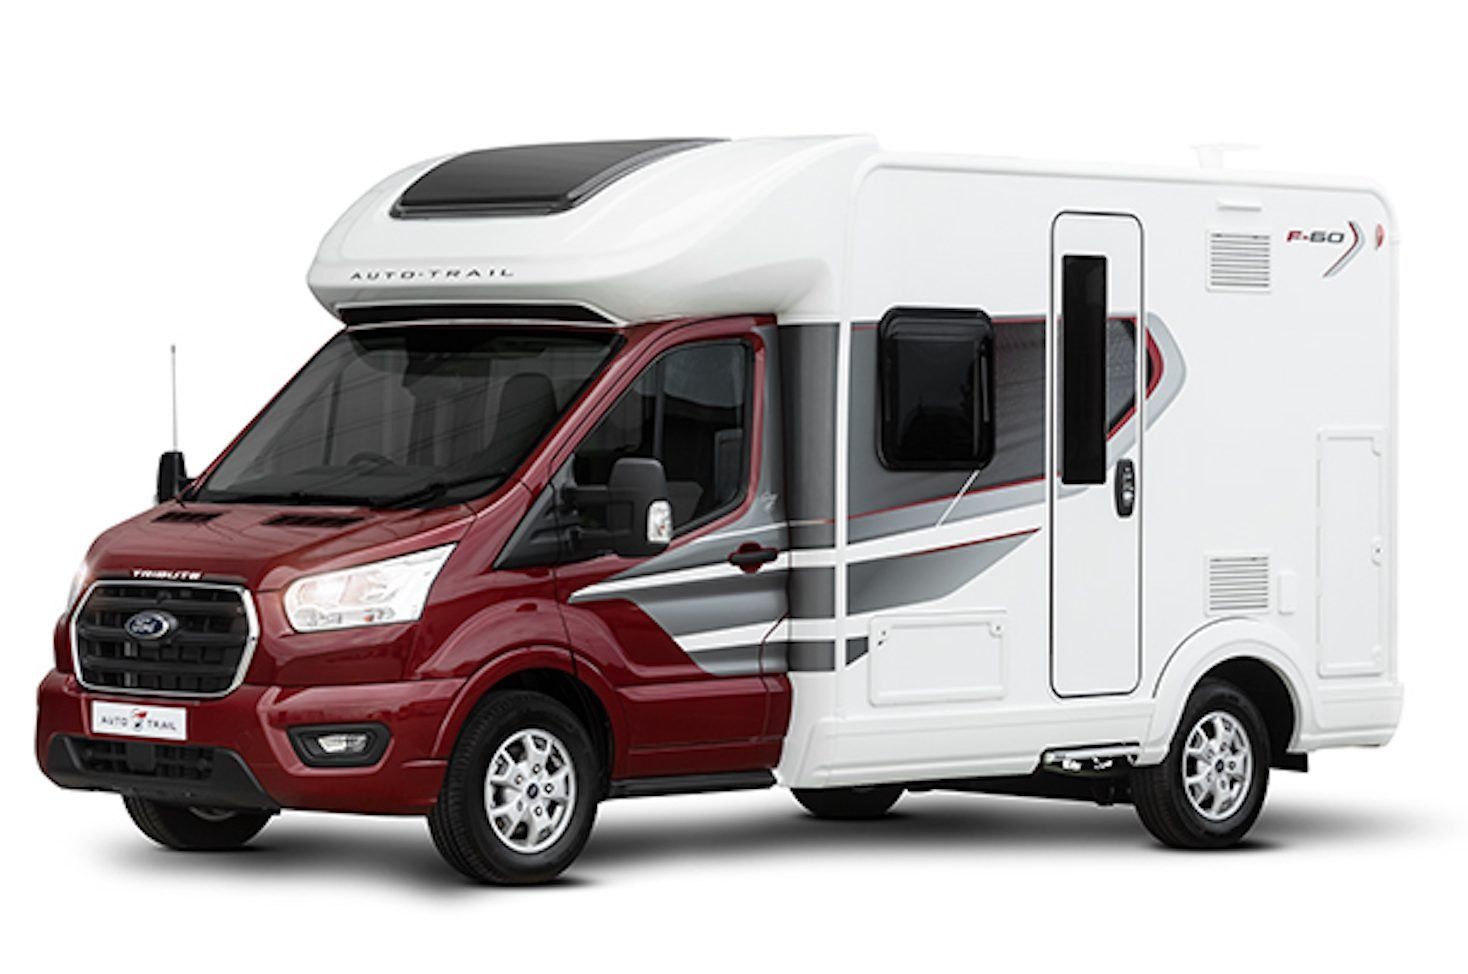 Hire an Automatic  Autotrail Tribute F60 - Compact 4 Berth Perfect for 2, max of 4 people